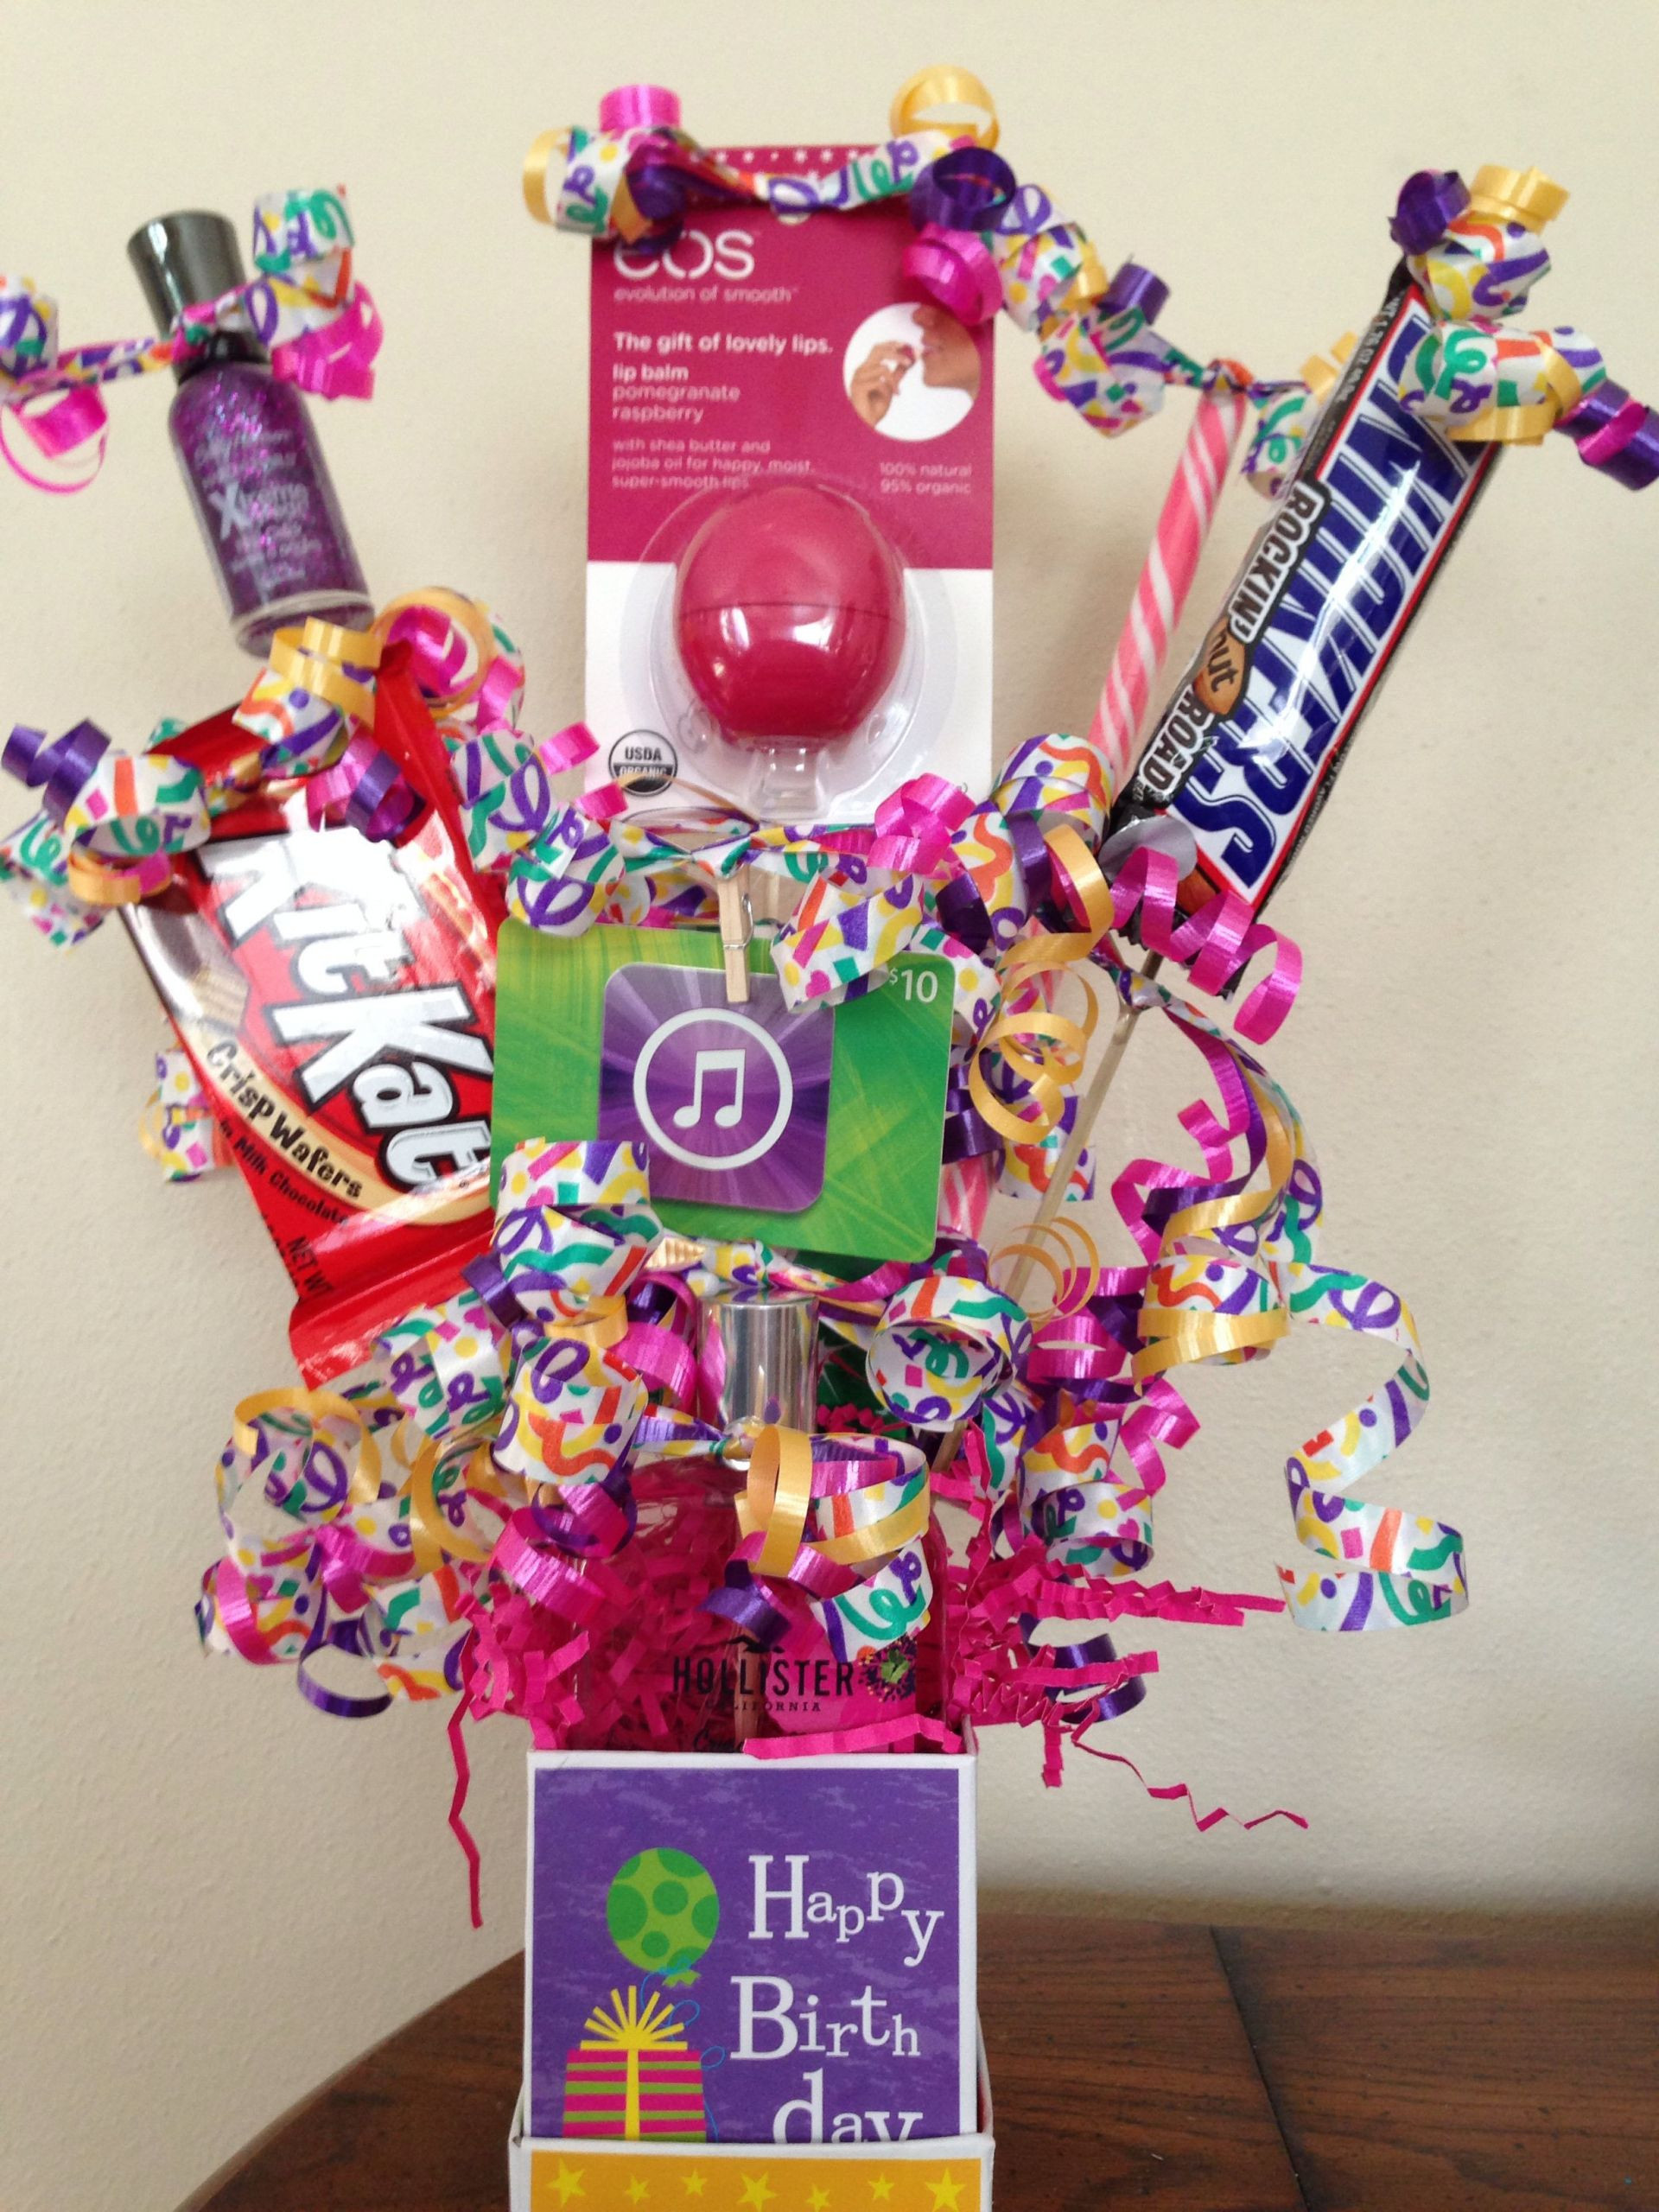 Top Gift Ideas For Girls
 22 Best Ideas Gift Basket Ideas for Teenage Girls Home